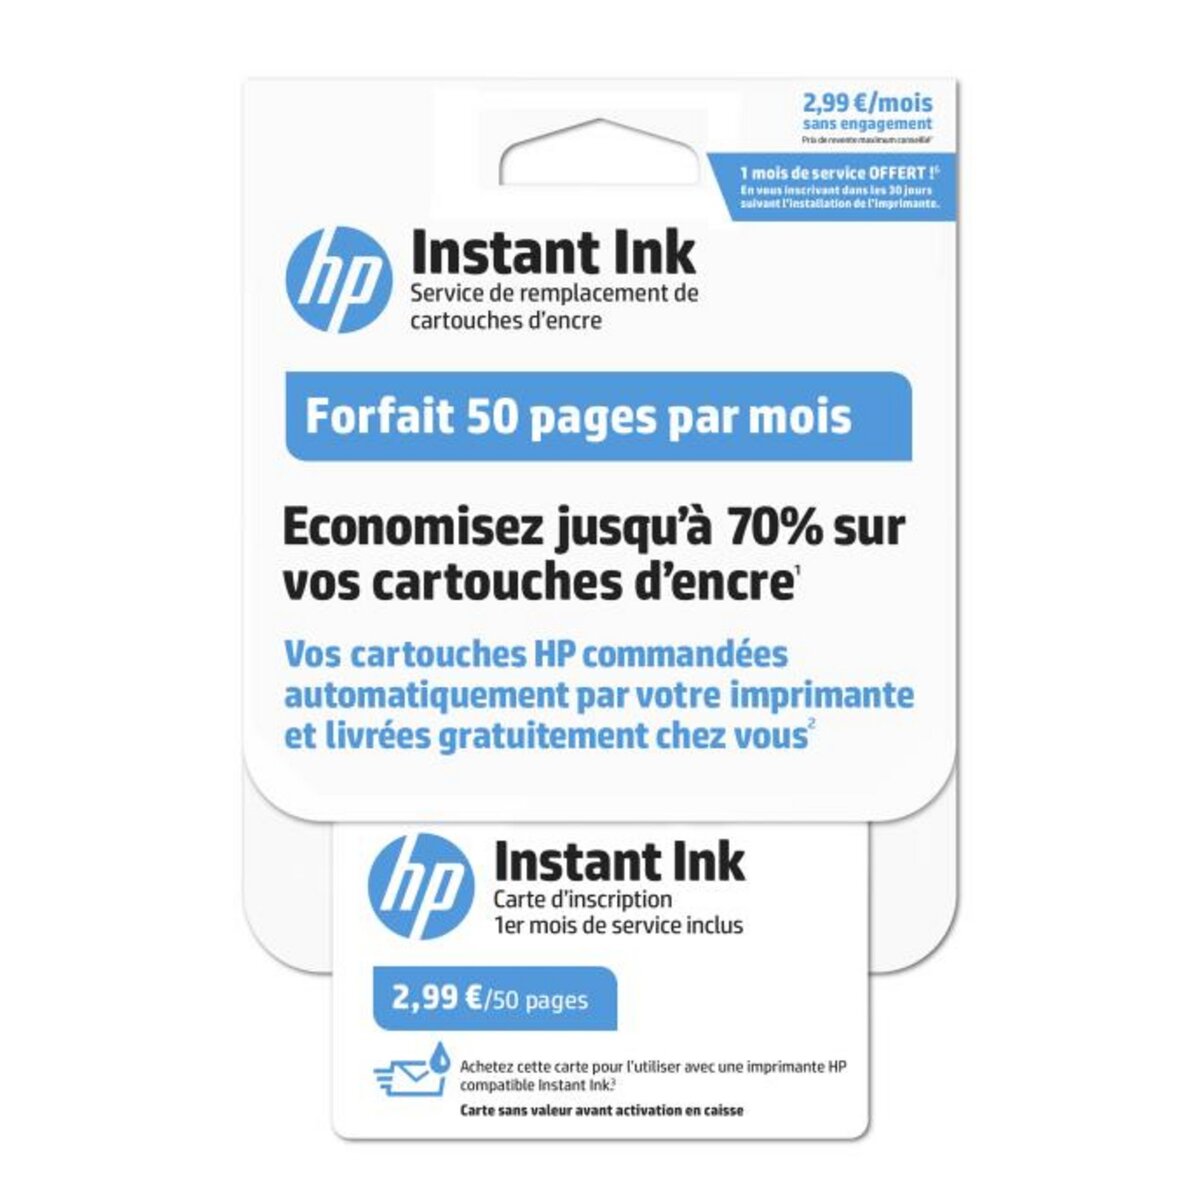 H.PACKARD Instant Ink - Forfait 50 pages/mois